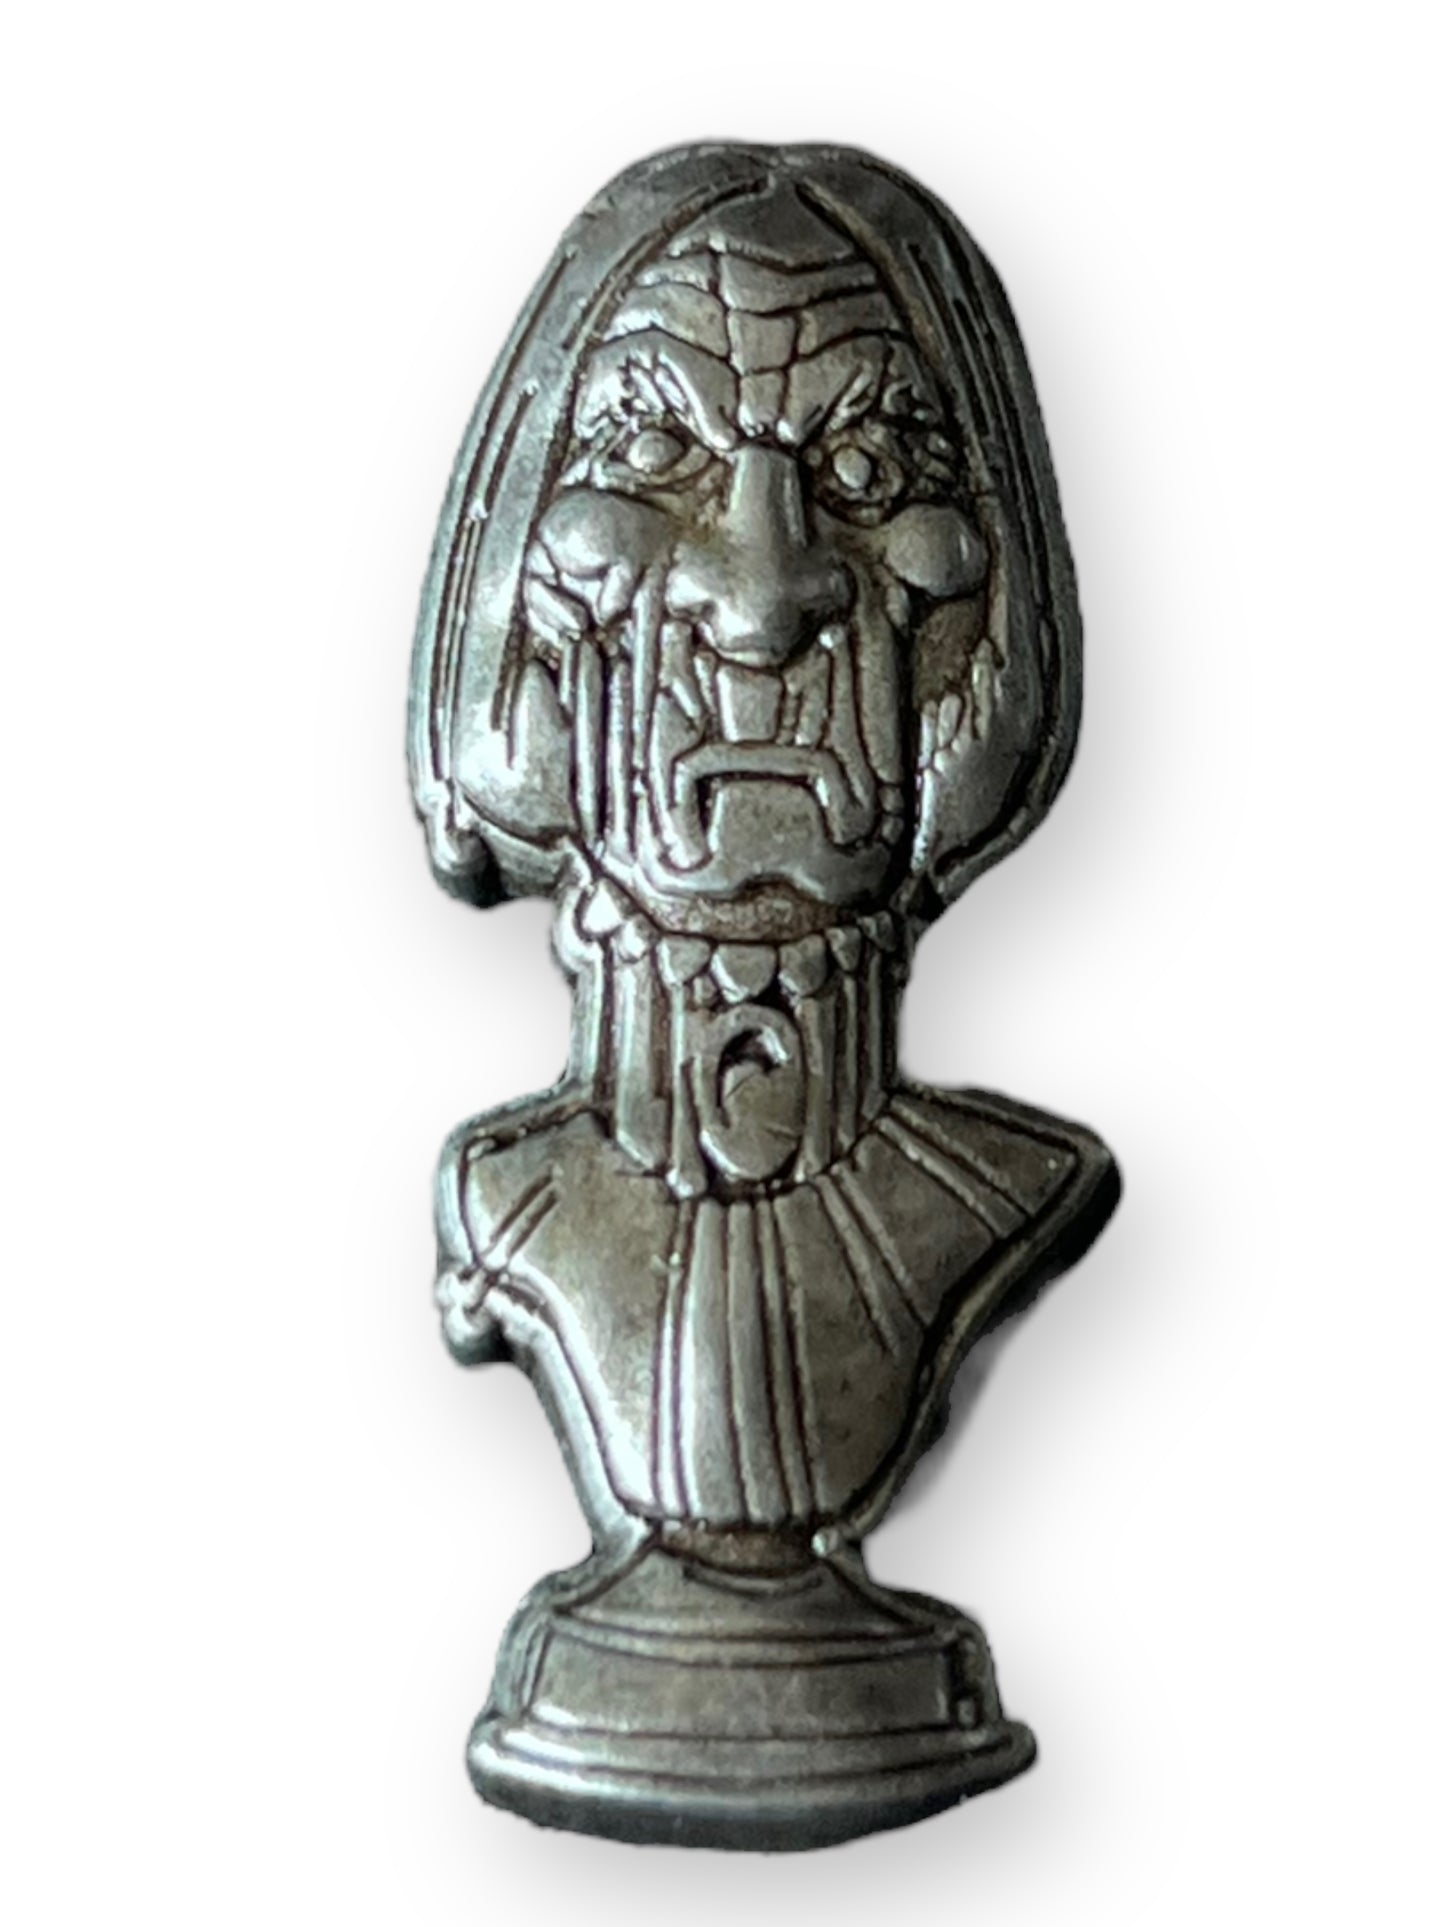 DSSH Haunted Mansion Statue Bust #4 Pin